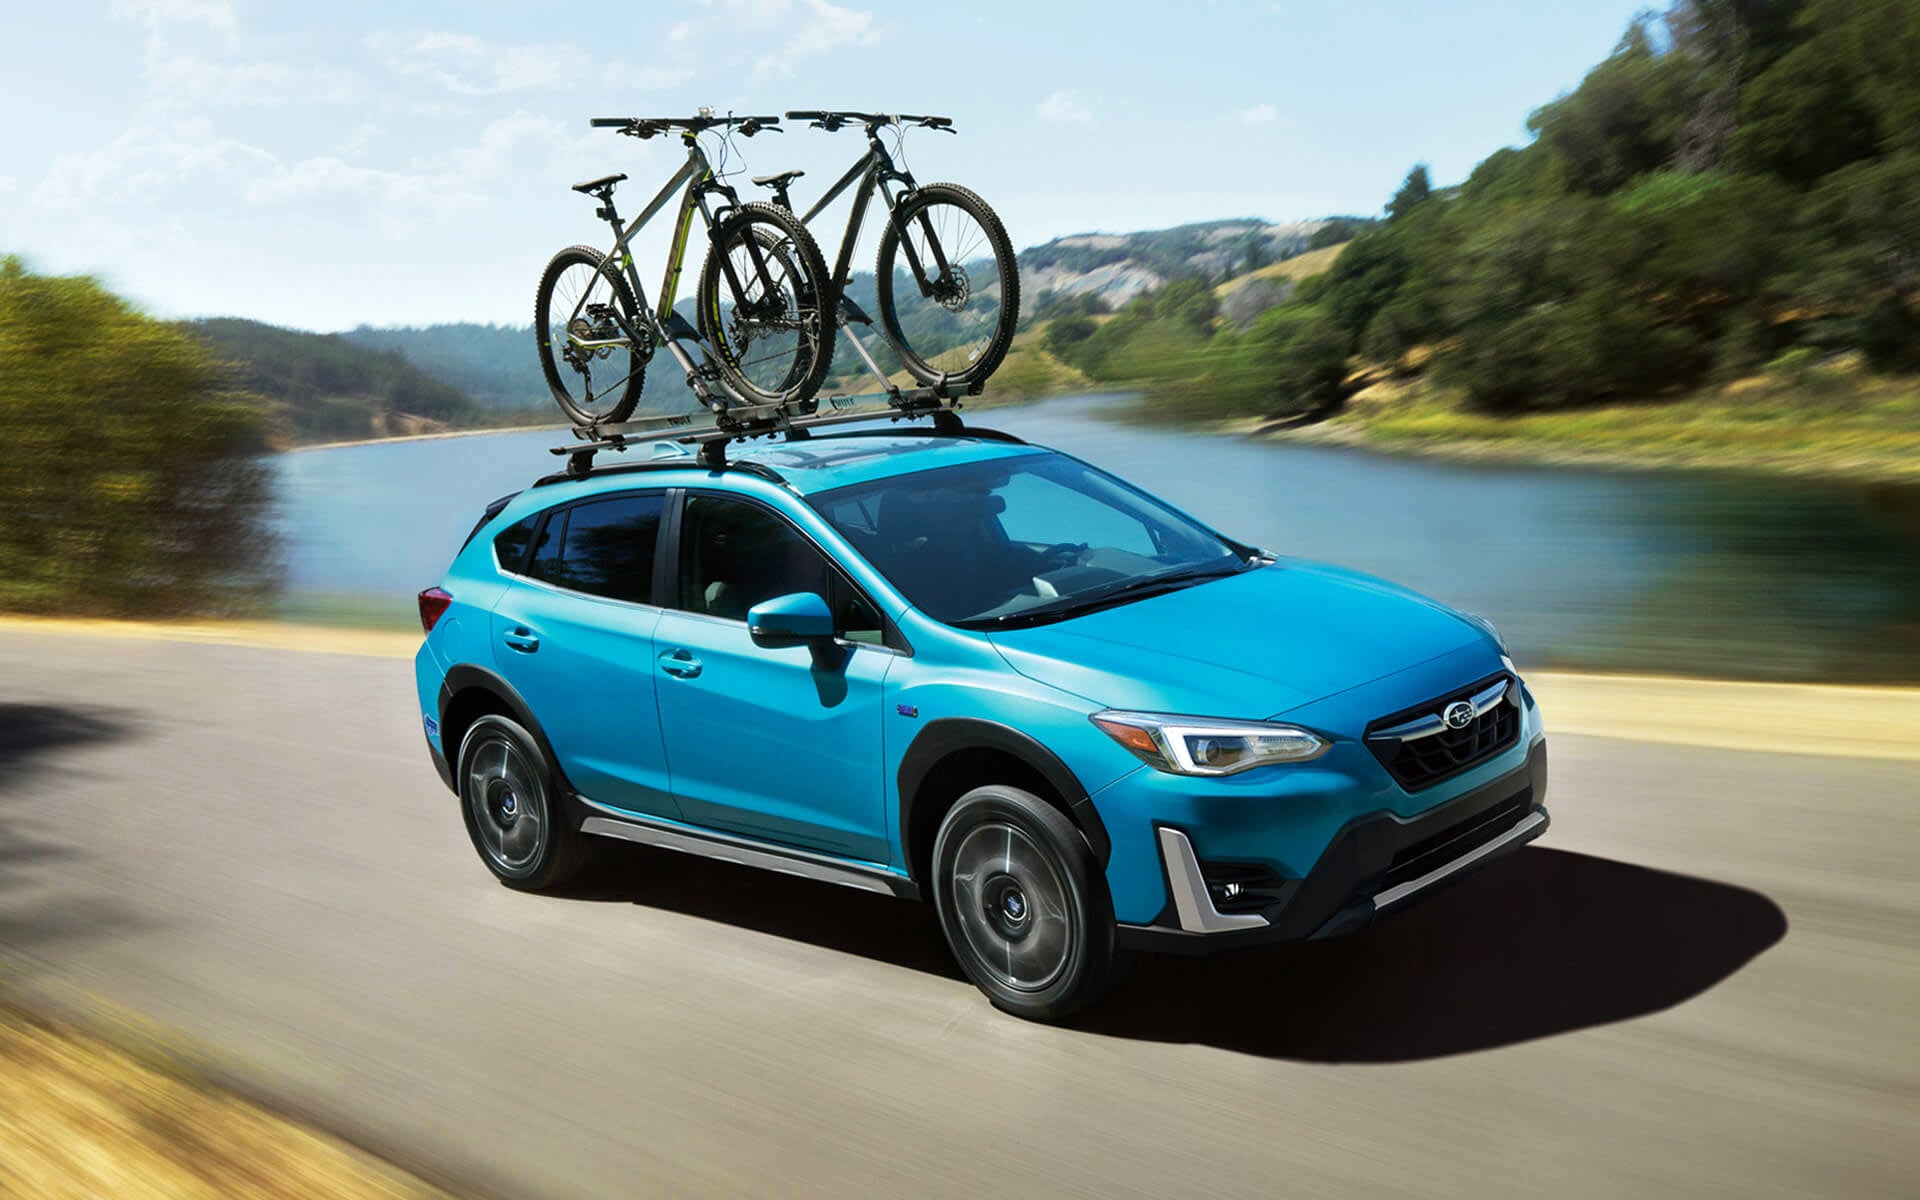 A blue Crosstrek Hybrid with two bicycles on its roof rack driving beside a river | Wyatt Johnson Subaru in Clarksville TN